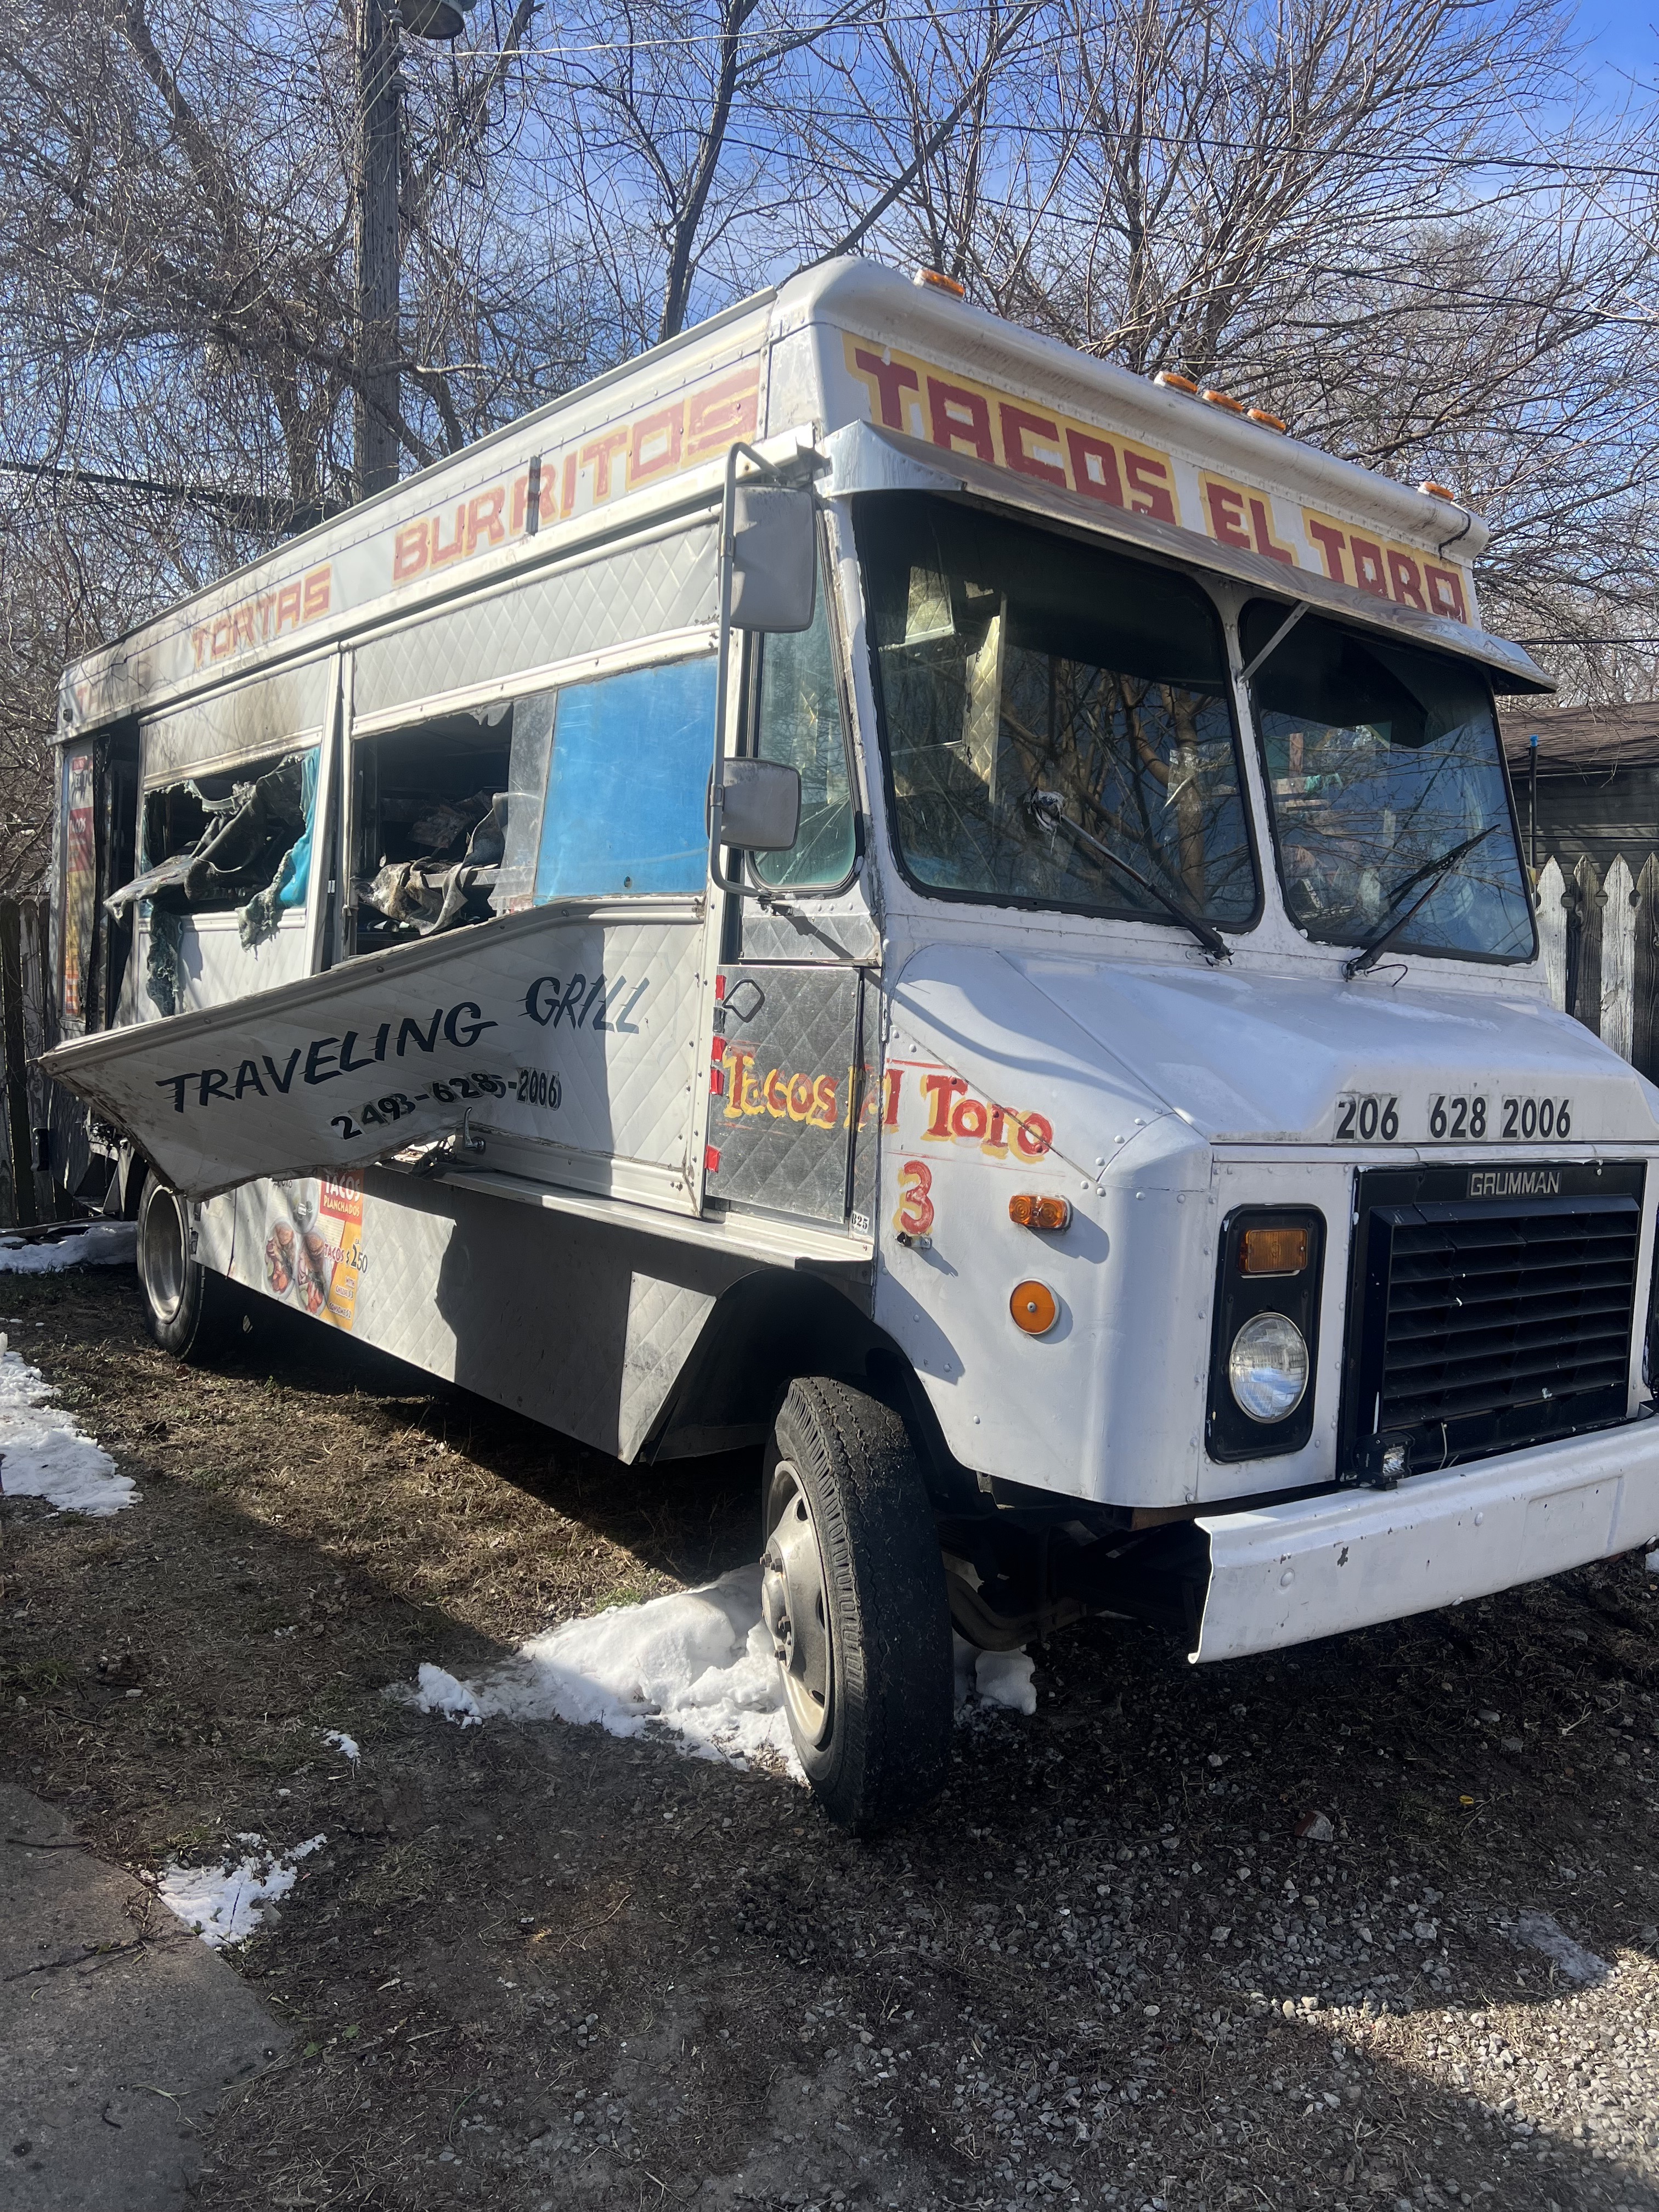 A white taco truck damaged by fire in Detroit, Michigan.